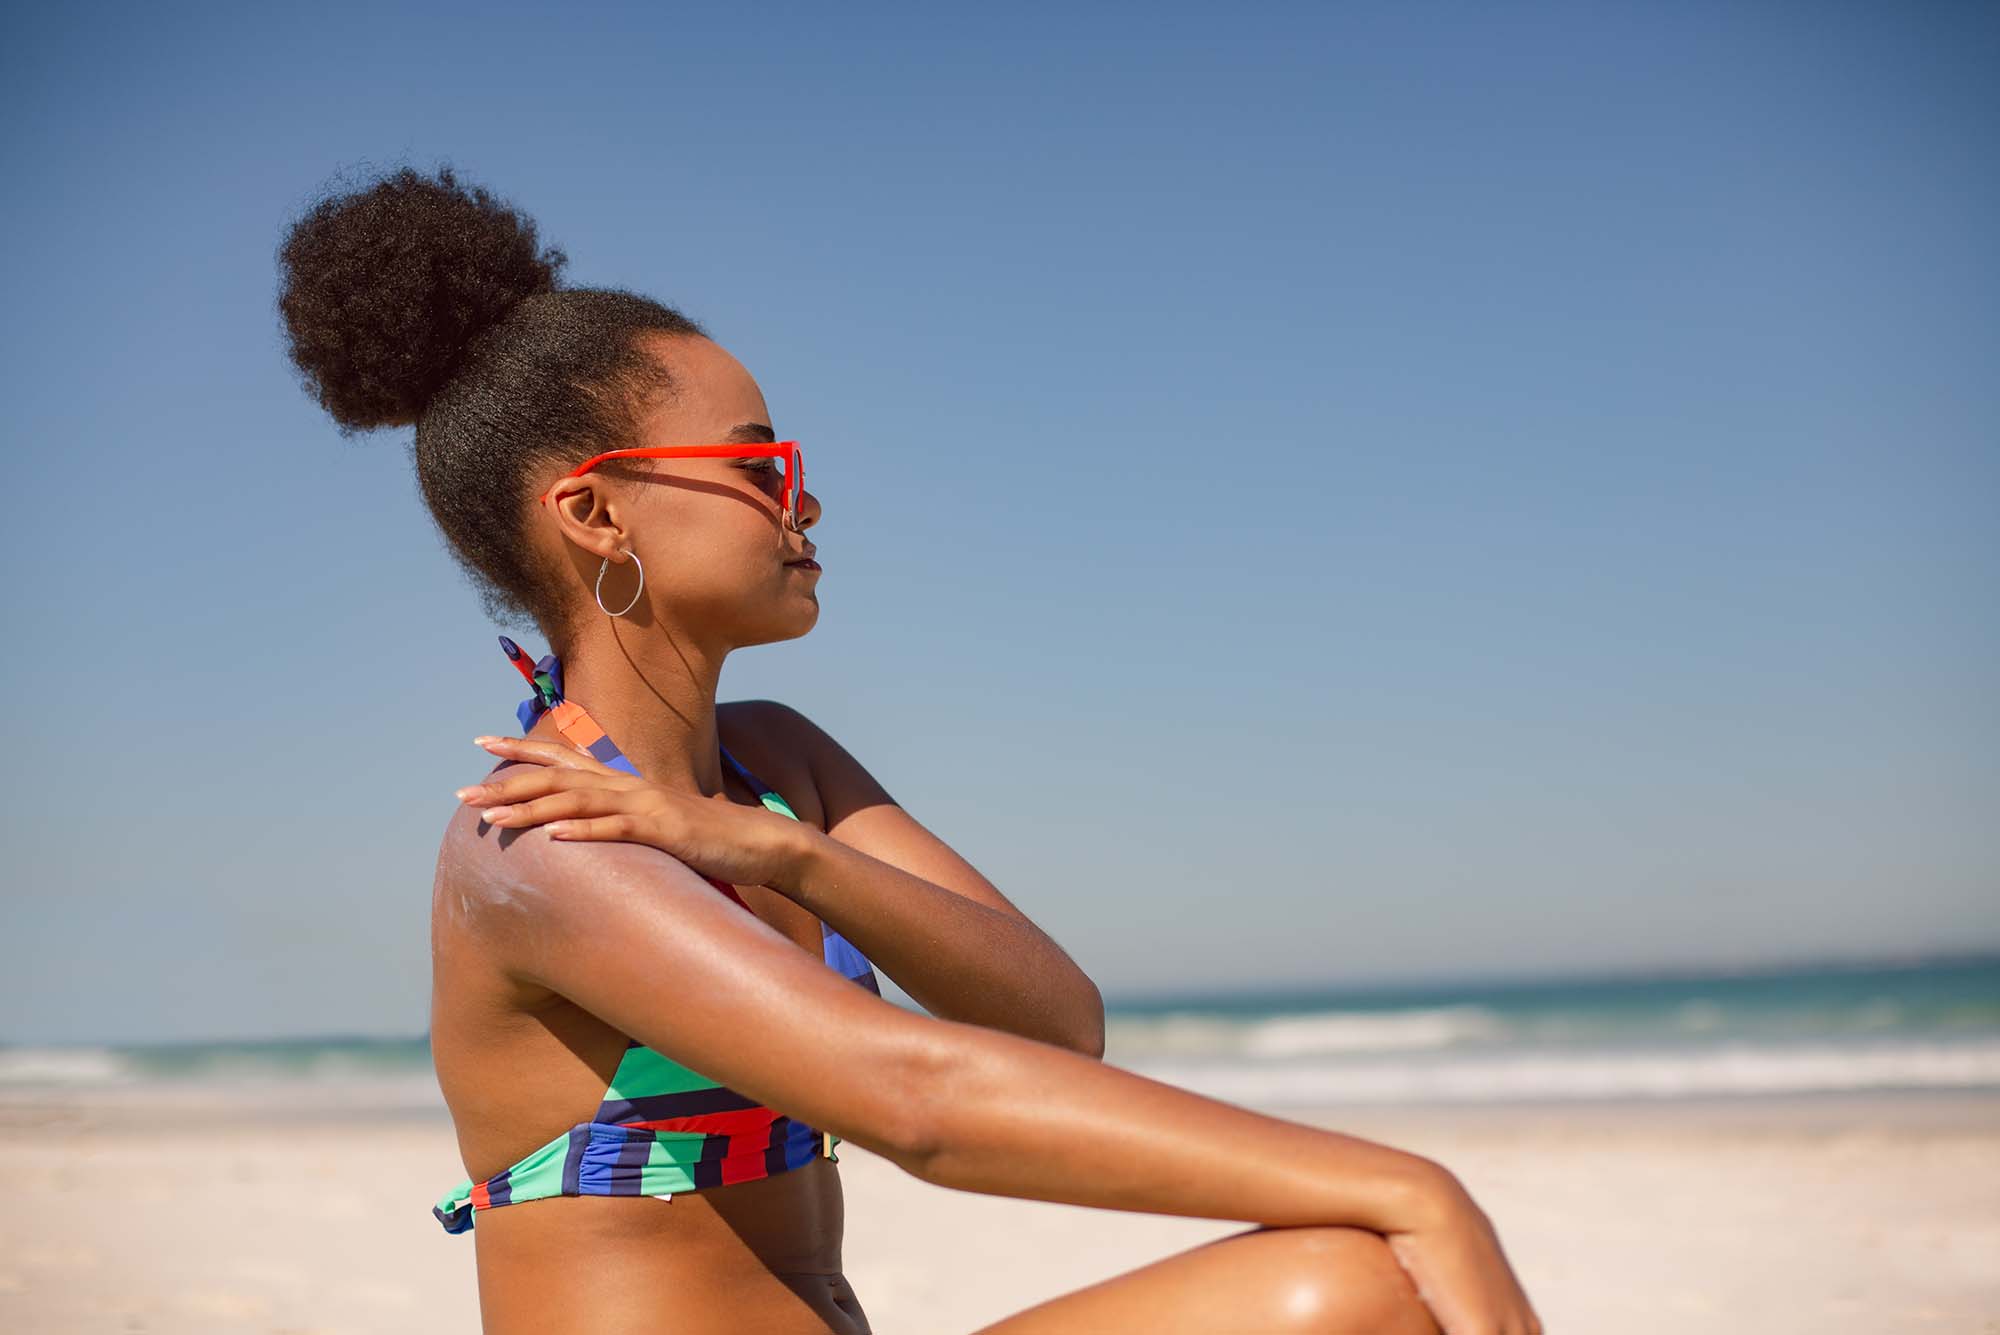 Sun Protection Tips for Those with Black and Brown Skin